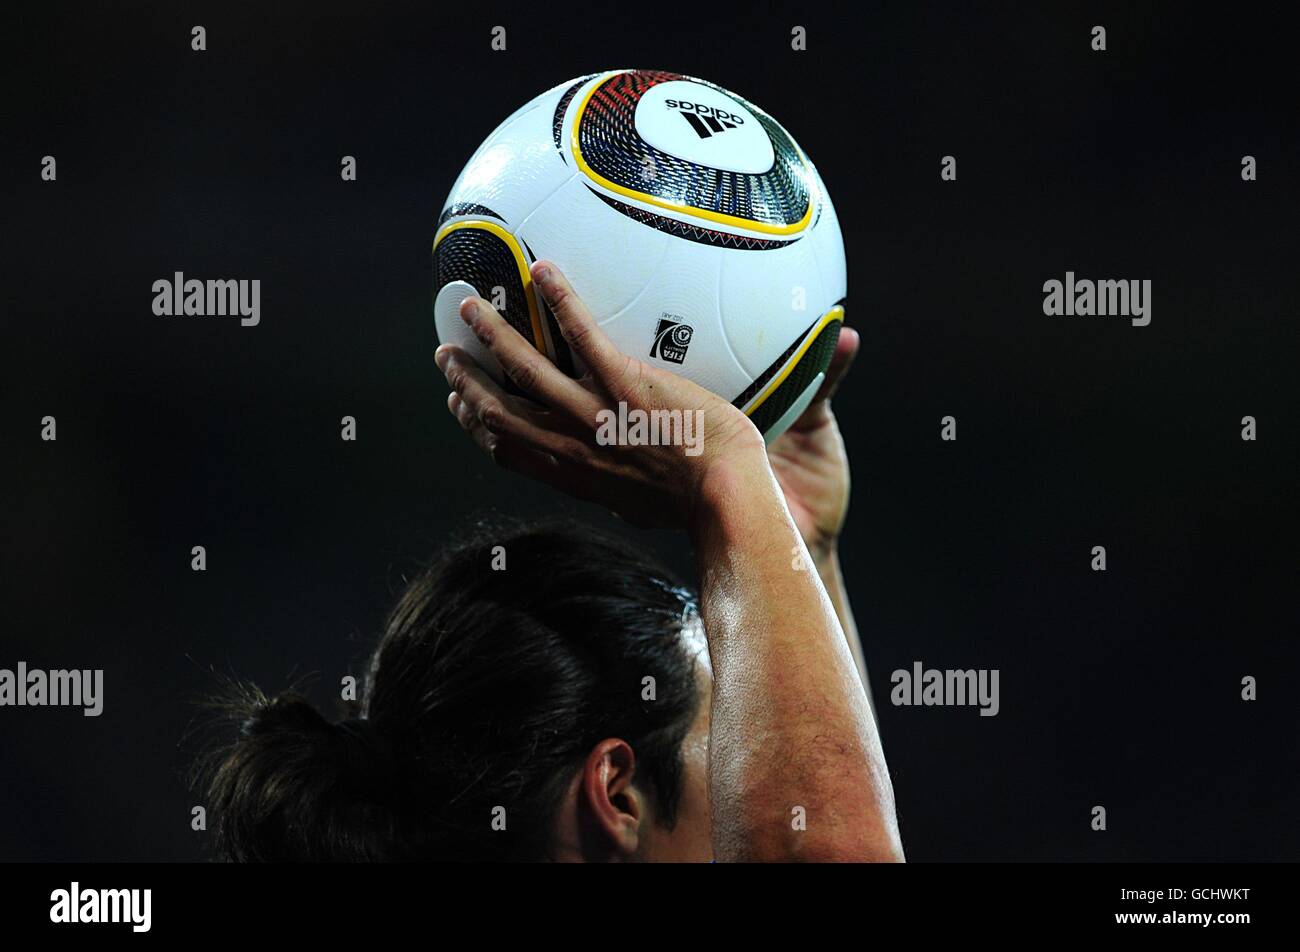 General view of the Jabulani world cup ball in the hands of Italy's Mauro Camoranesi as he prepares to take a throw in Stock Photo